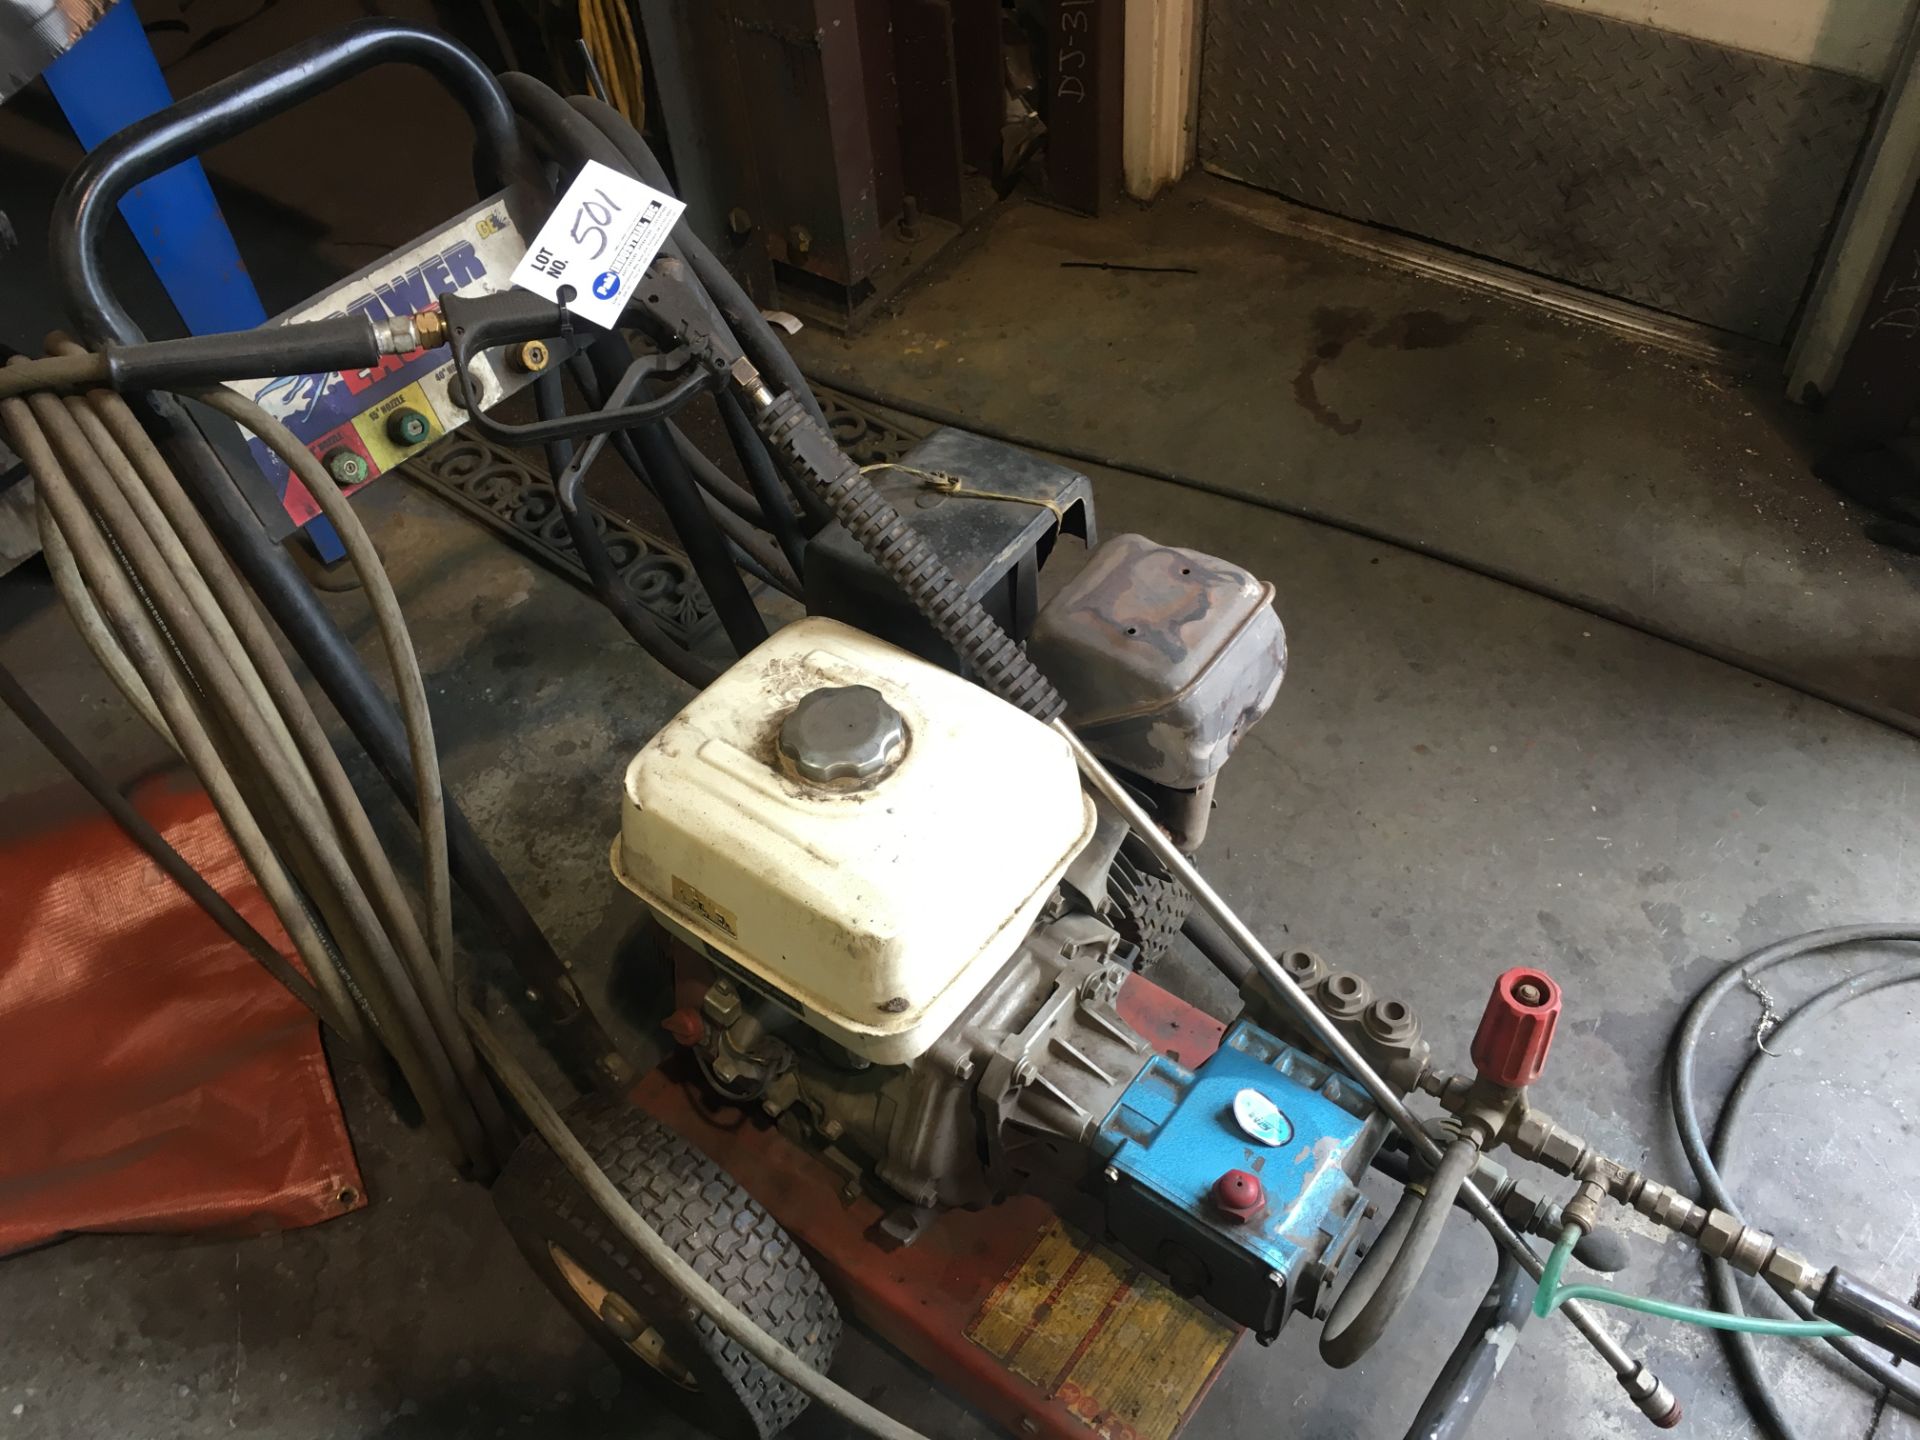 Power Ease Pressure Washer on cart